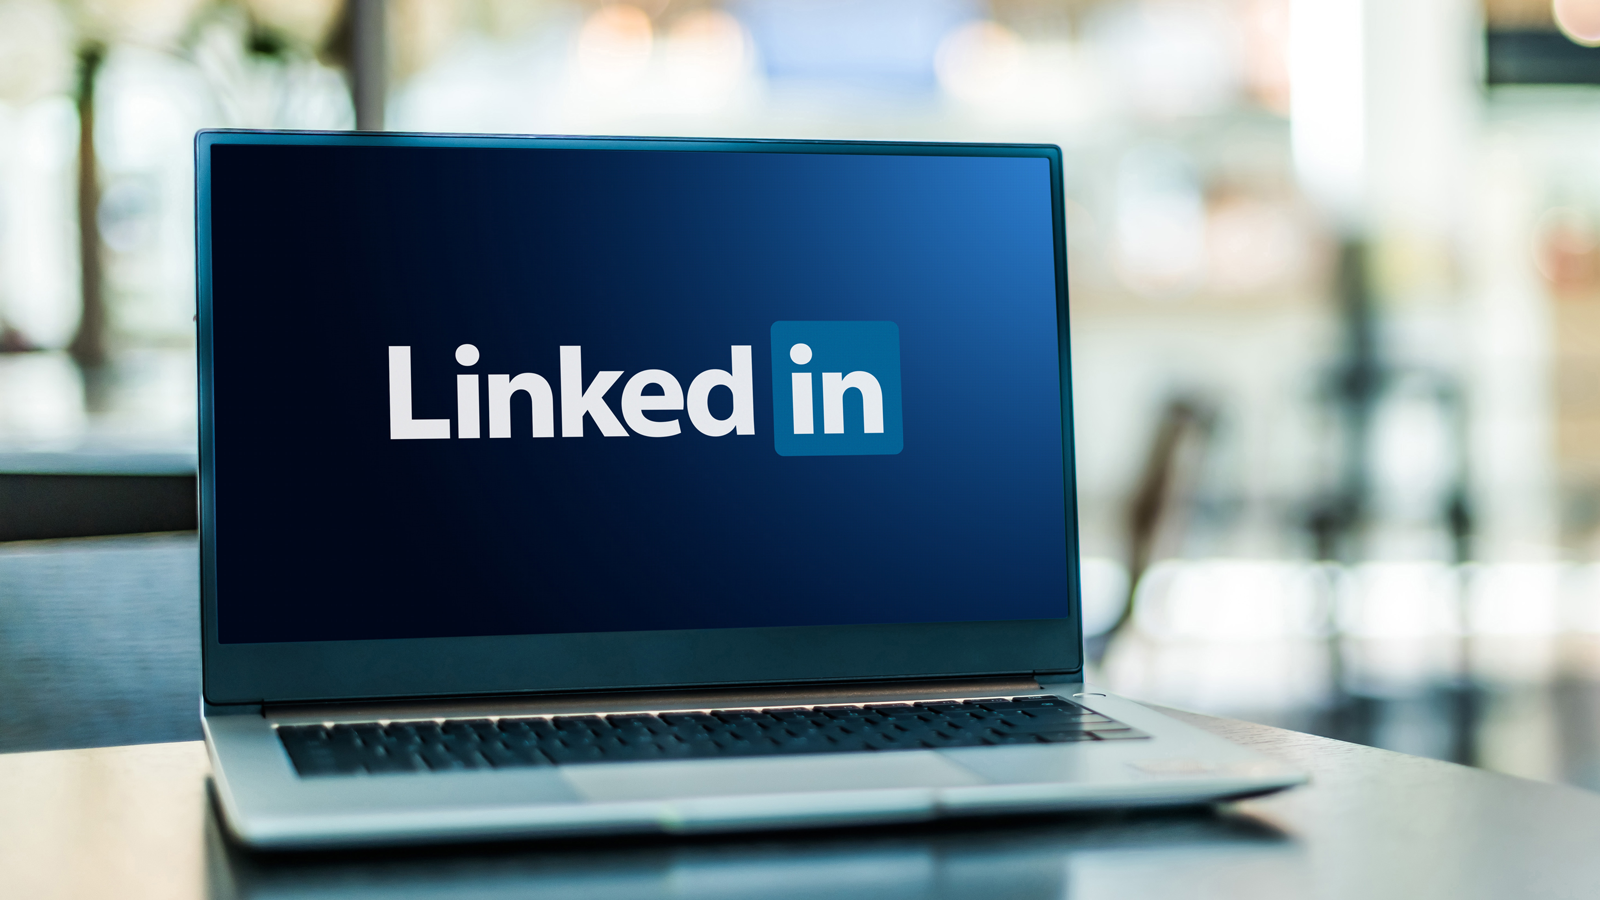 LinkedIn forced to disable advertising tool for European users in compliance with EU ‘rulebook’